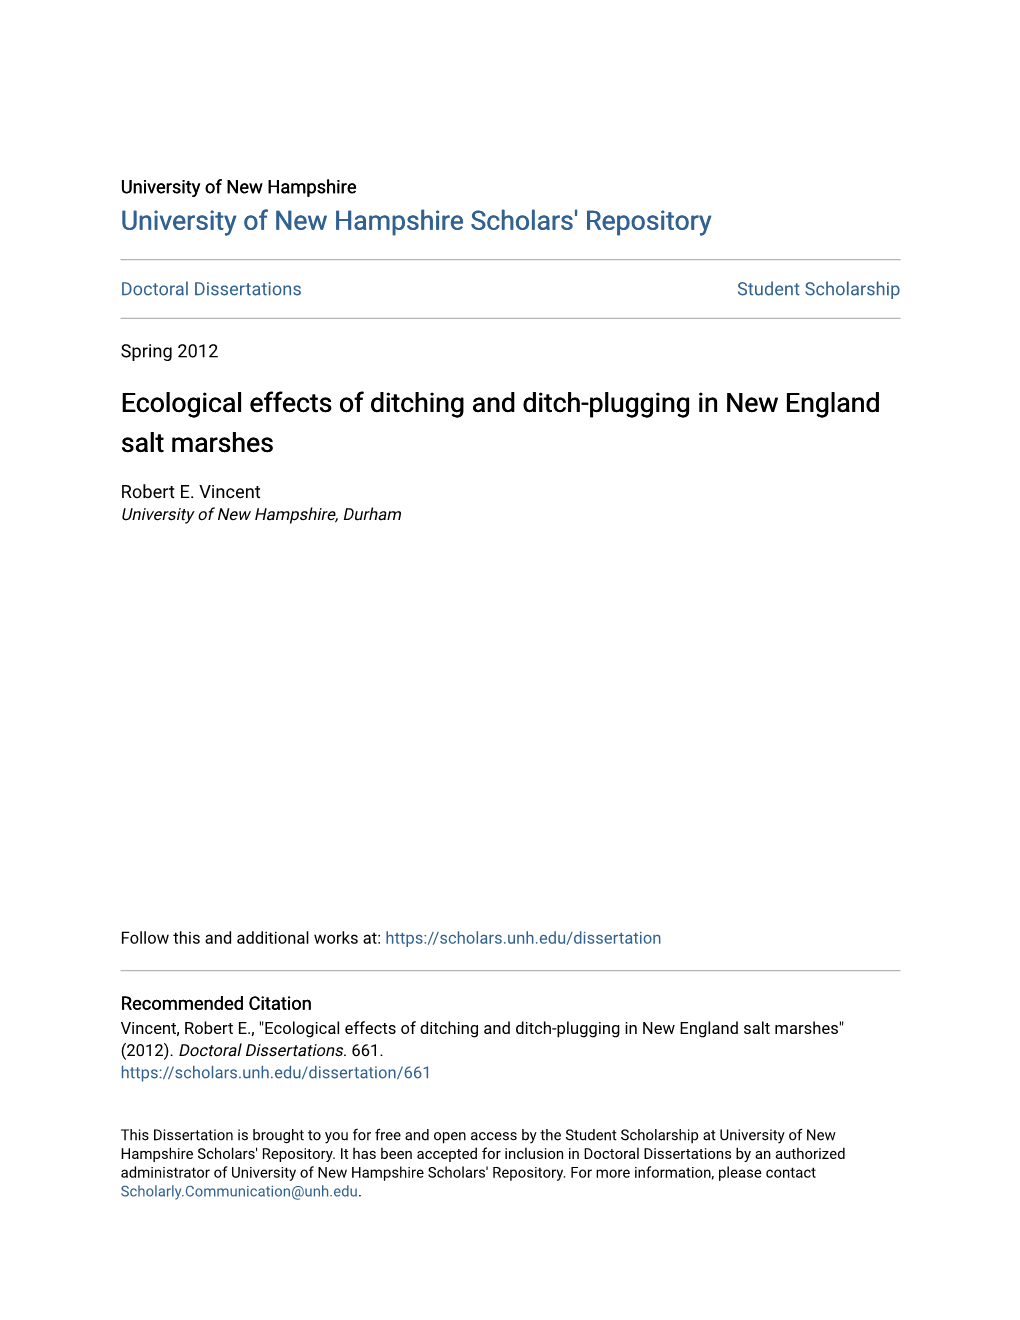 Ecological Effects of Ditching and Ditch-Plugging in New England Salt Marshes